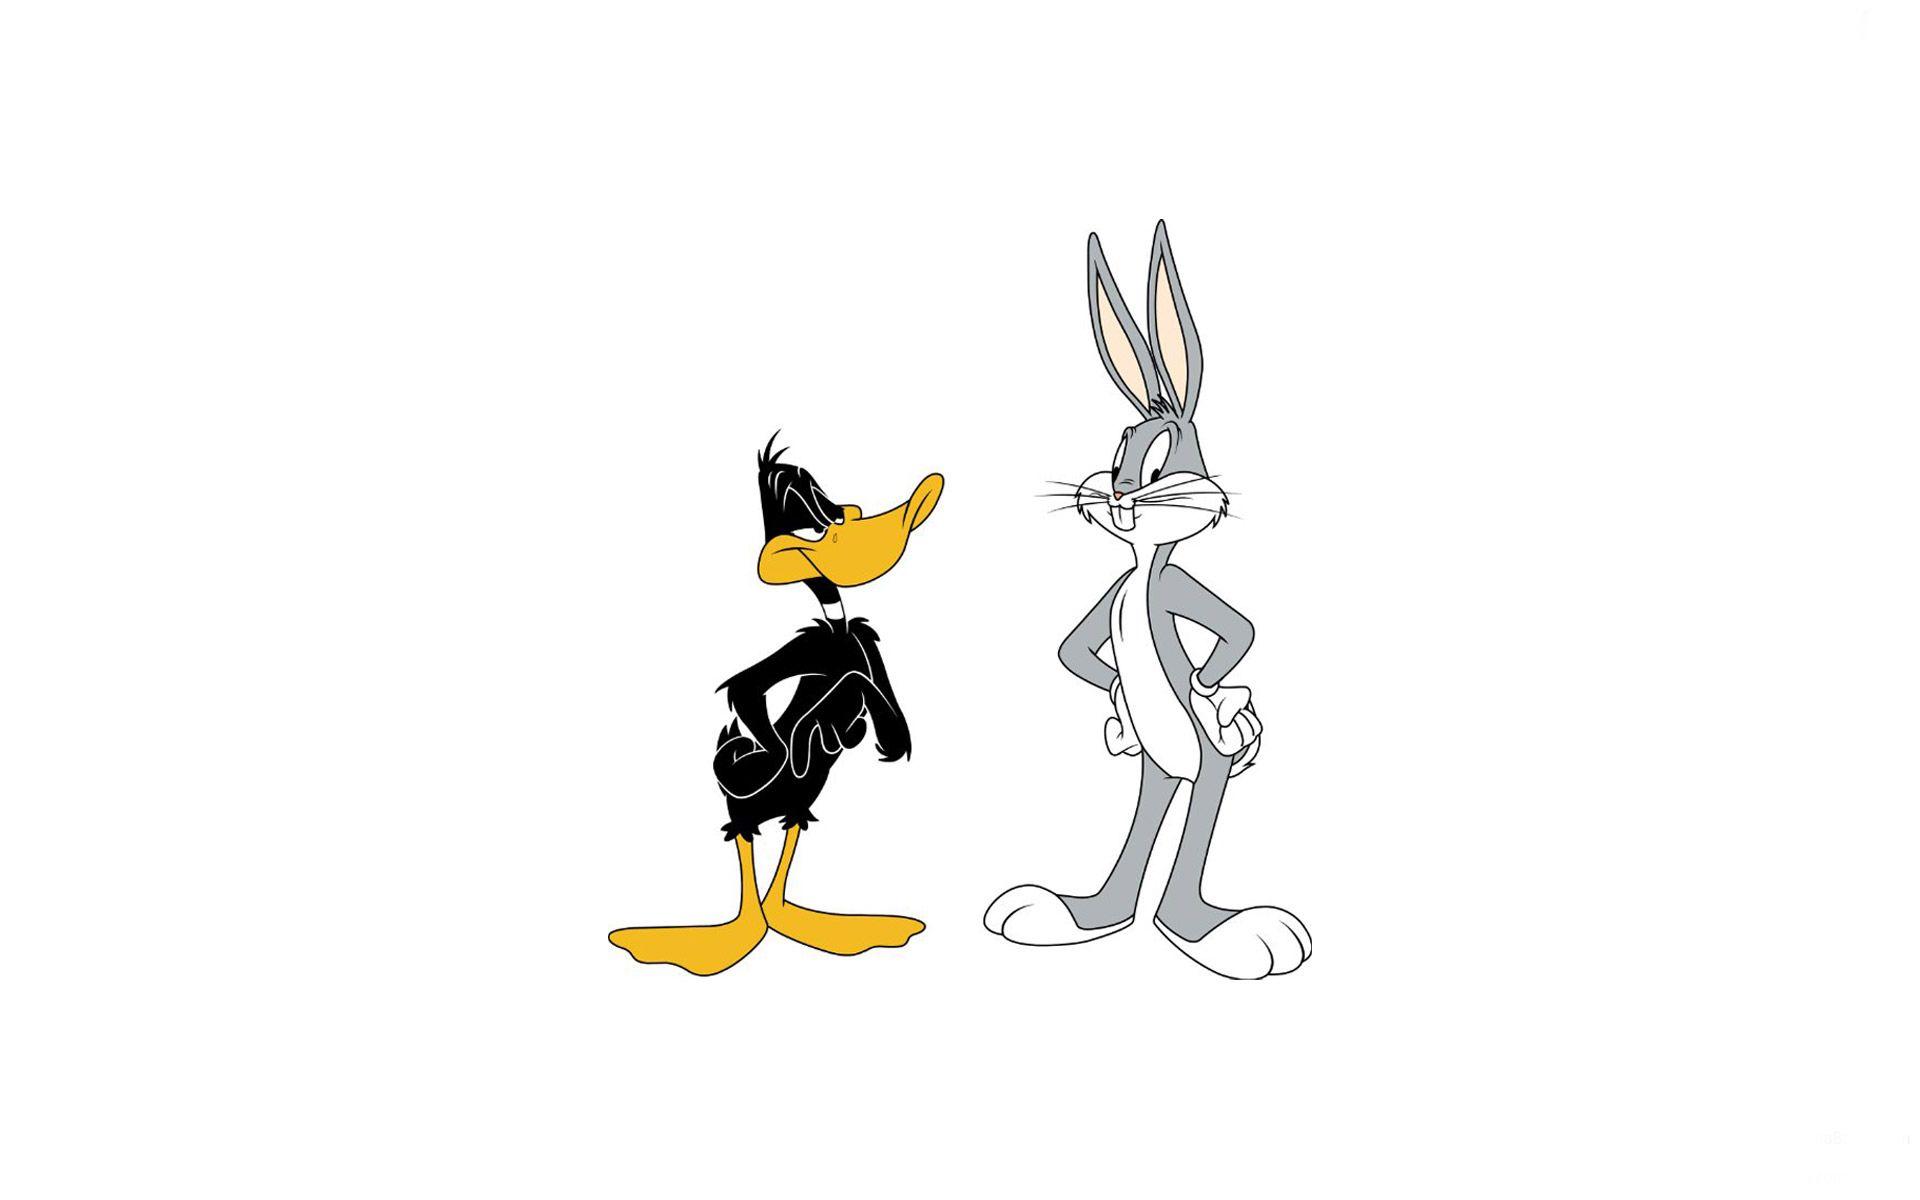 Lola and Bugs Bunny HD Image Wallpaper for iPhone Cartoons 1920